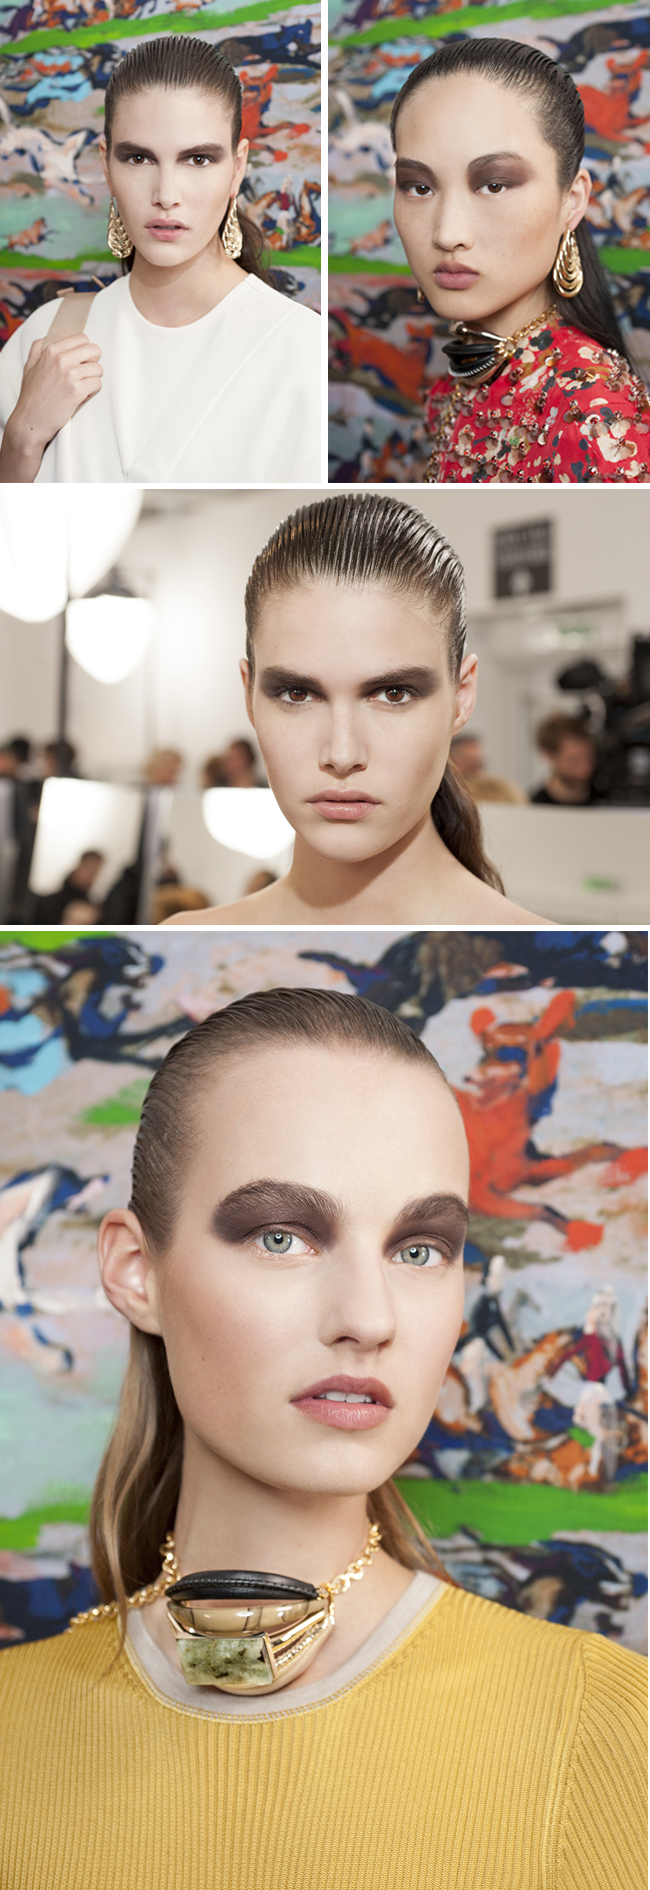 Backstage, Dior Cruise 2017, Dior Makeup, Dior Beauty, Peter Philips, Dior Show, Dior, Perfect Wedding Magazine, Perfect Wedding Blog, Bridal Beauty, Beauty Trends